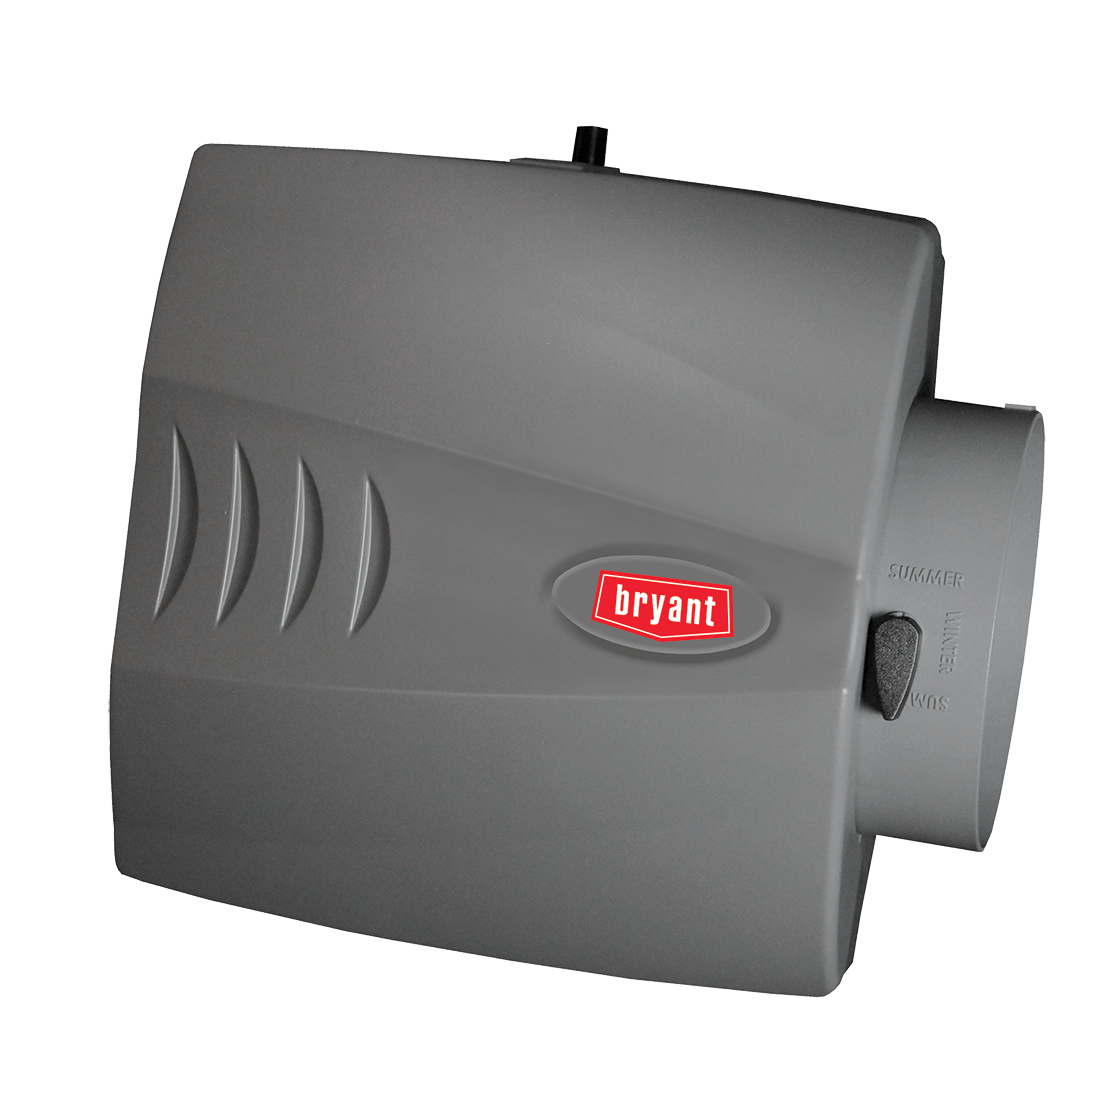 Preferred™ Series Large Bypass Humidifier HUMCRLBP — Hamtramck, MI — A & E Heating & Cooling